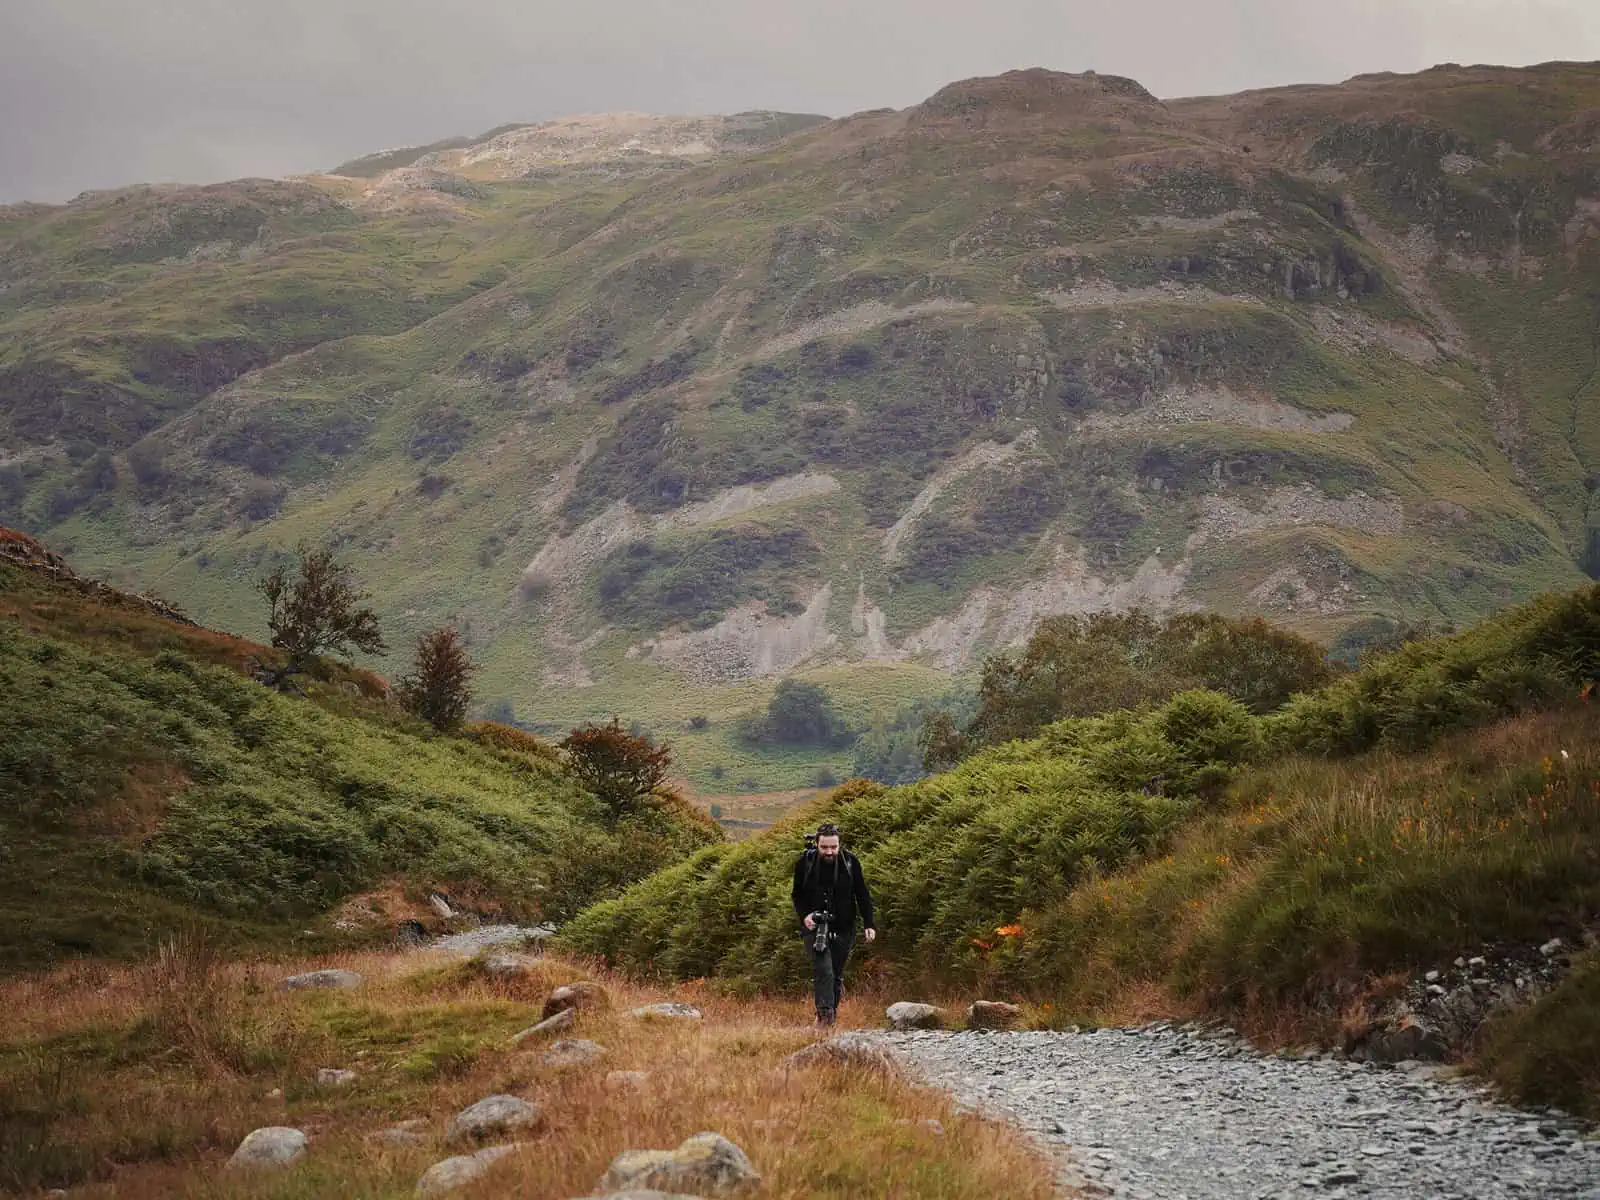 ID: A landscape image. Matt walks up a mountain path and is fairly small in the image as he walks toward the camera. He is mostly wearing black and holds his camera in hand. The mountains in the background are green and brown. The sky is dark grey.